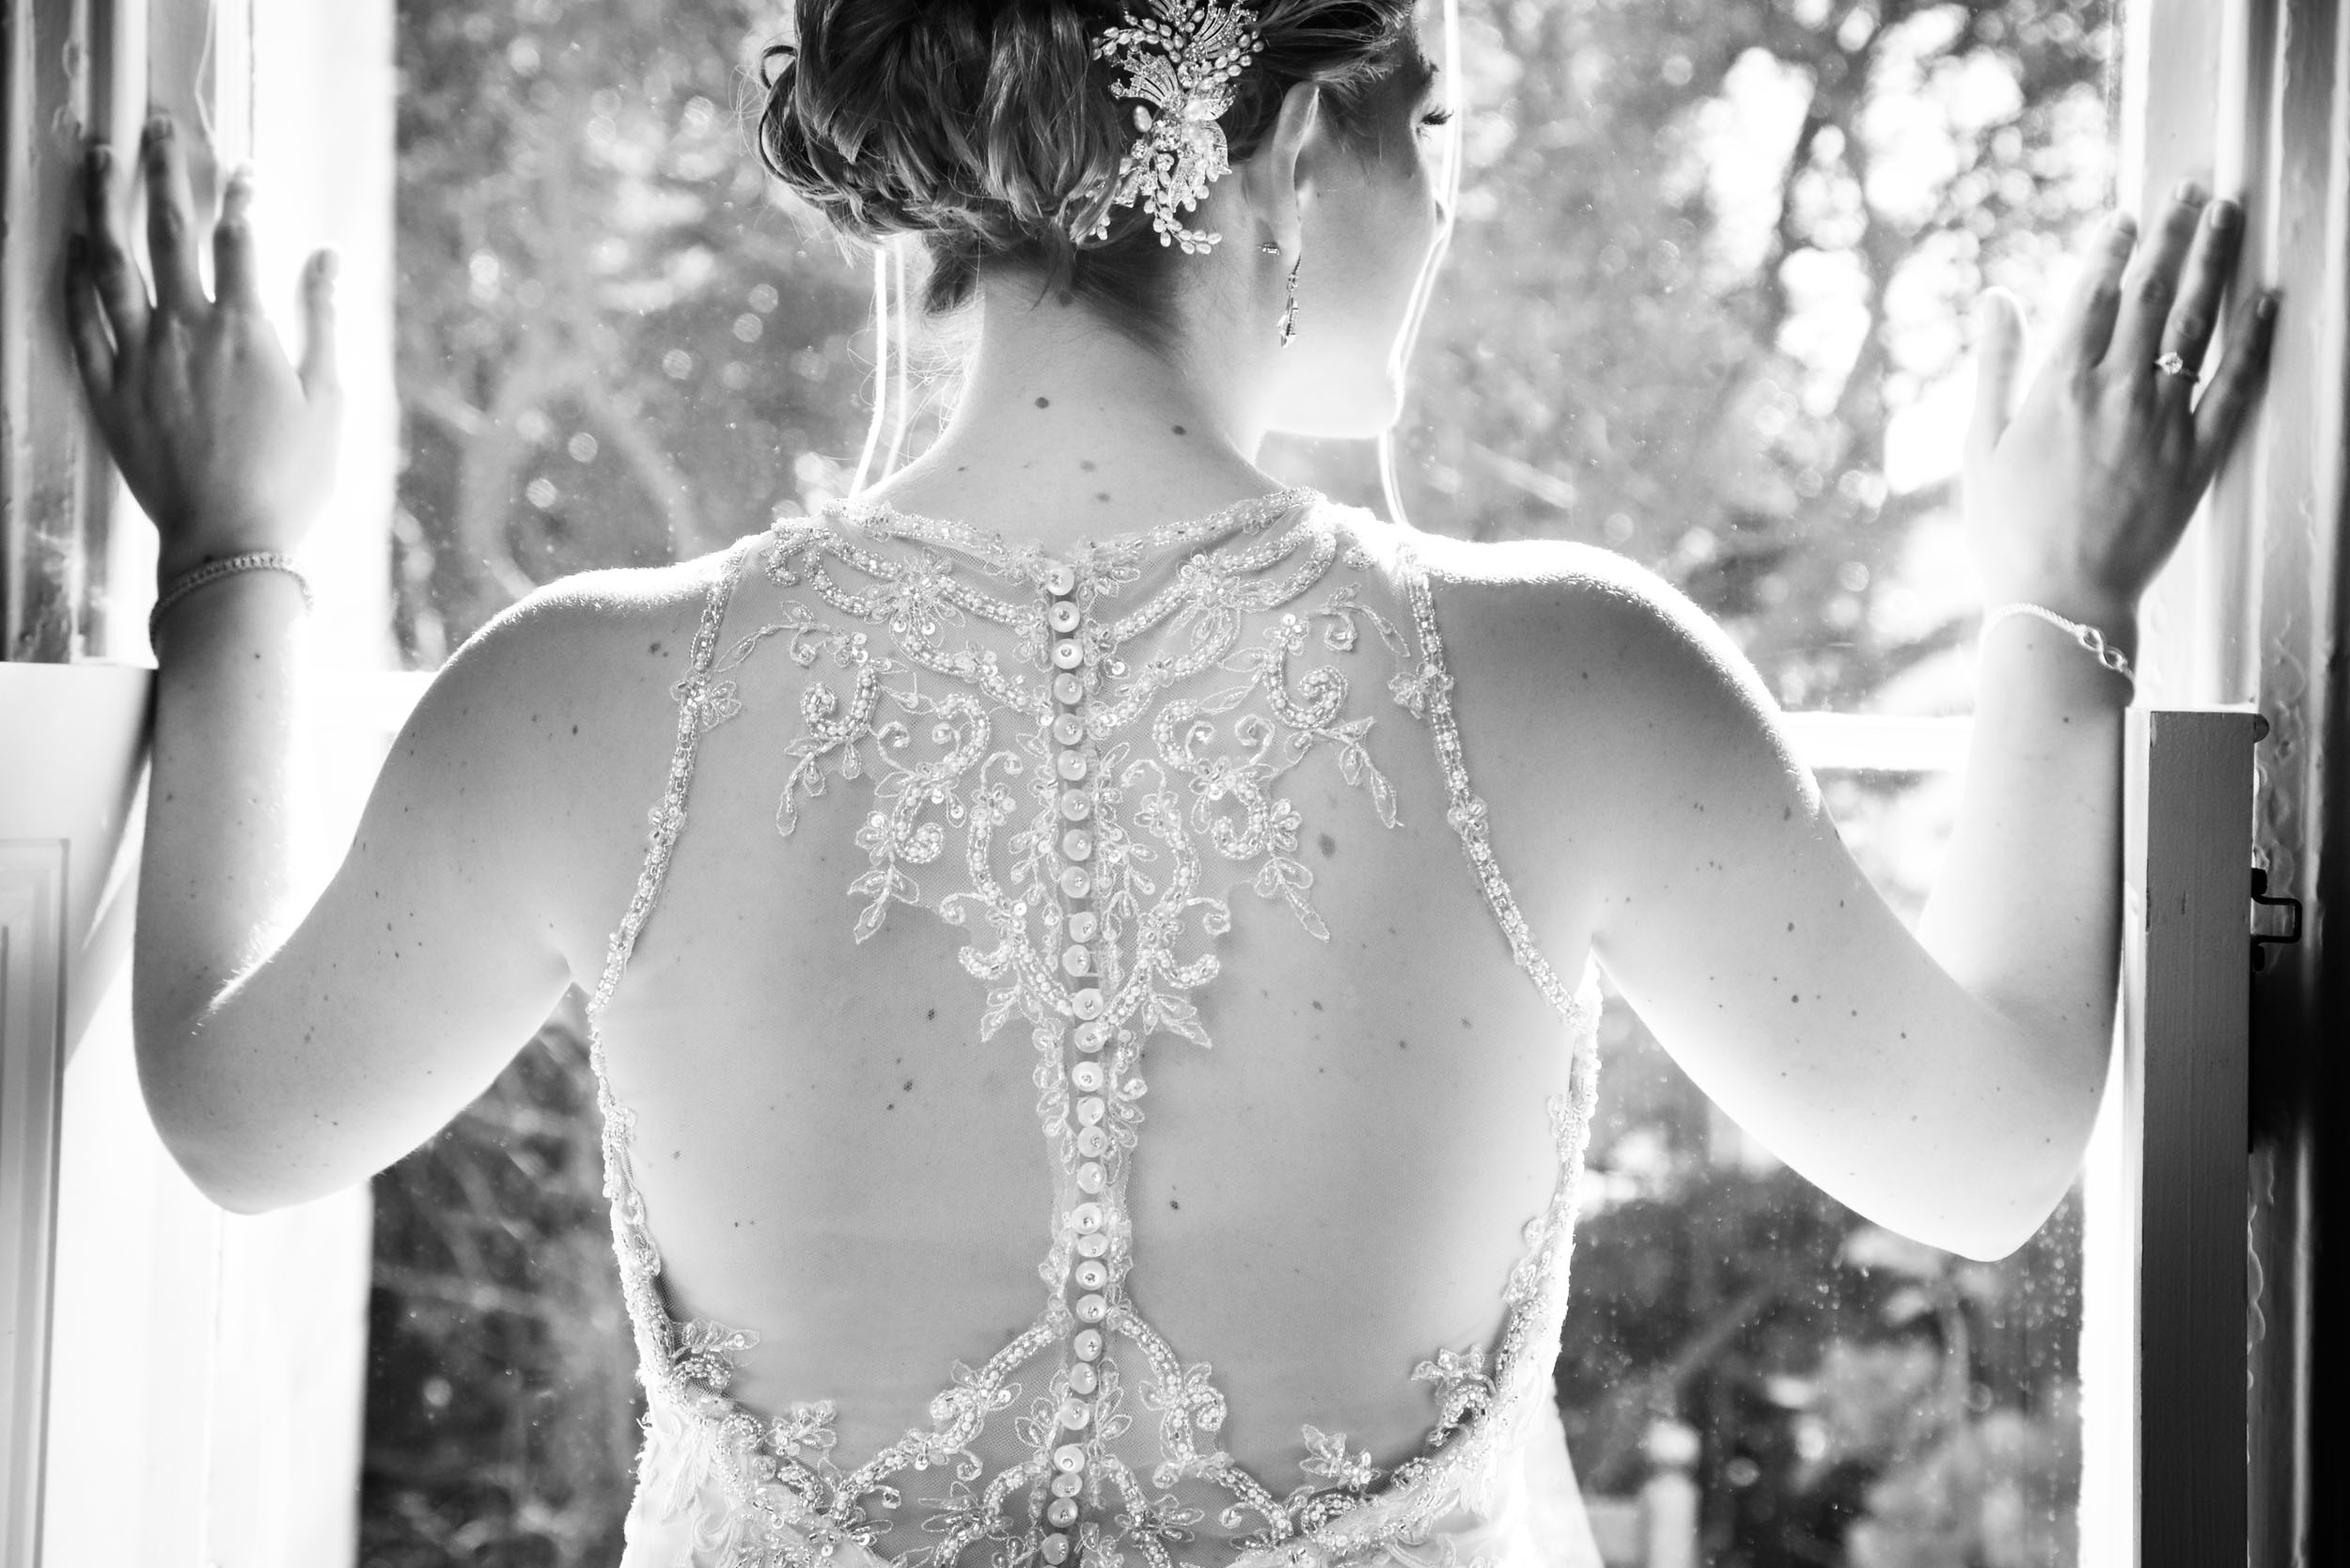 Back of bride's gown detail